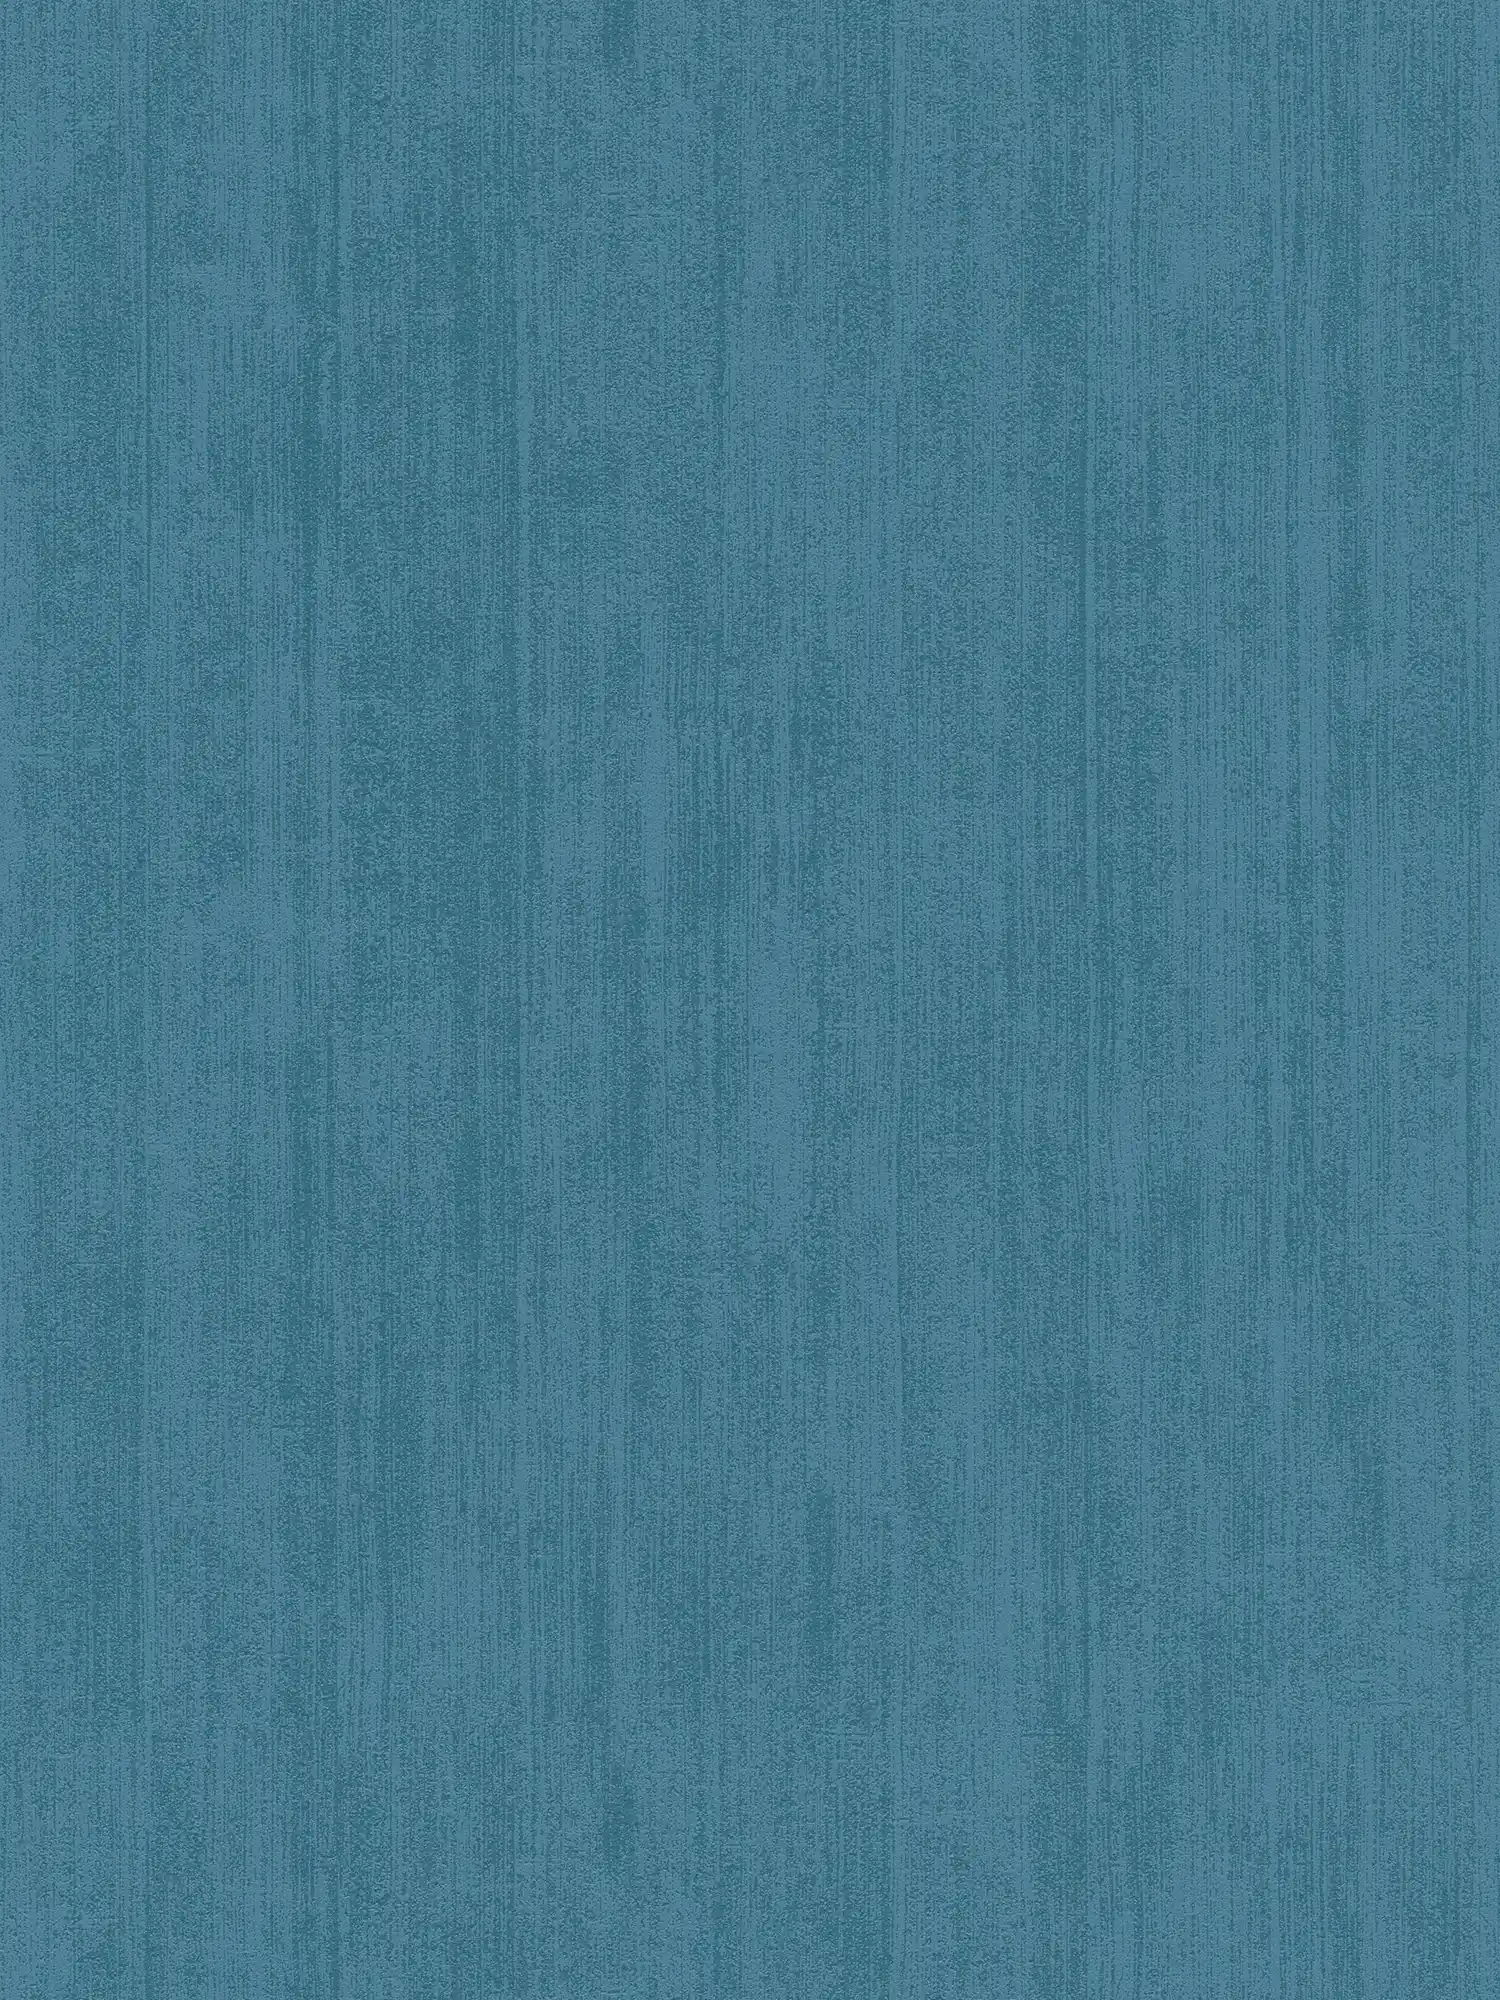 Plain non-woven wallpaper with tone-on-tone hatching - blue
